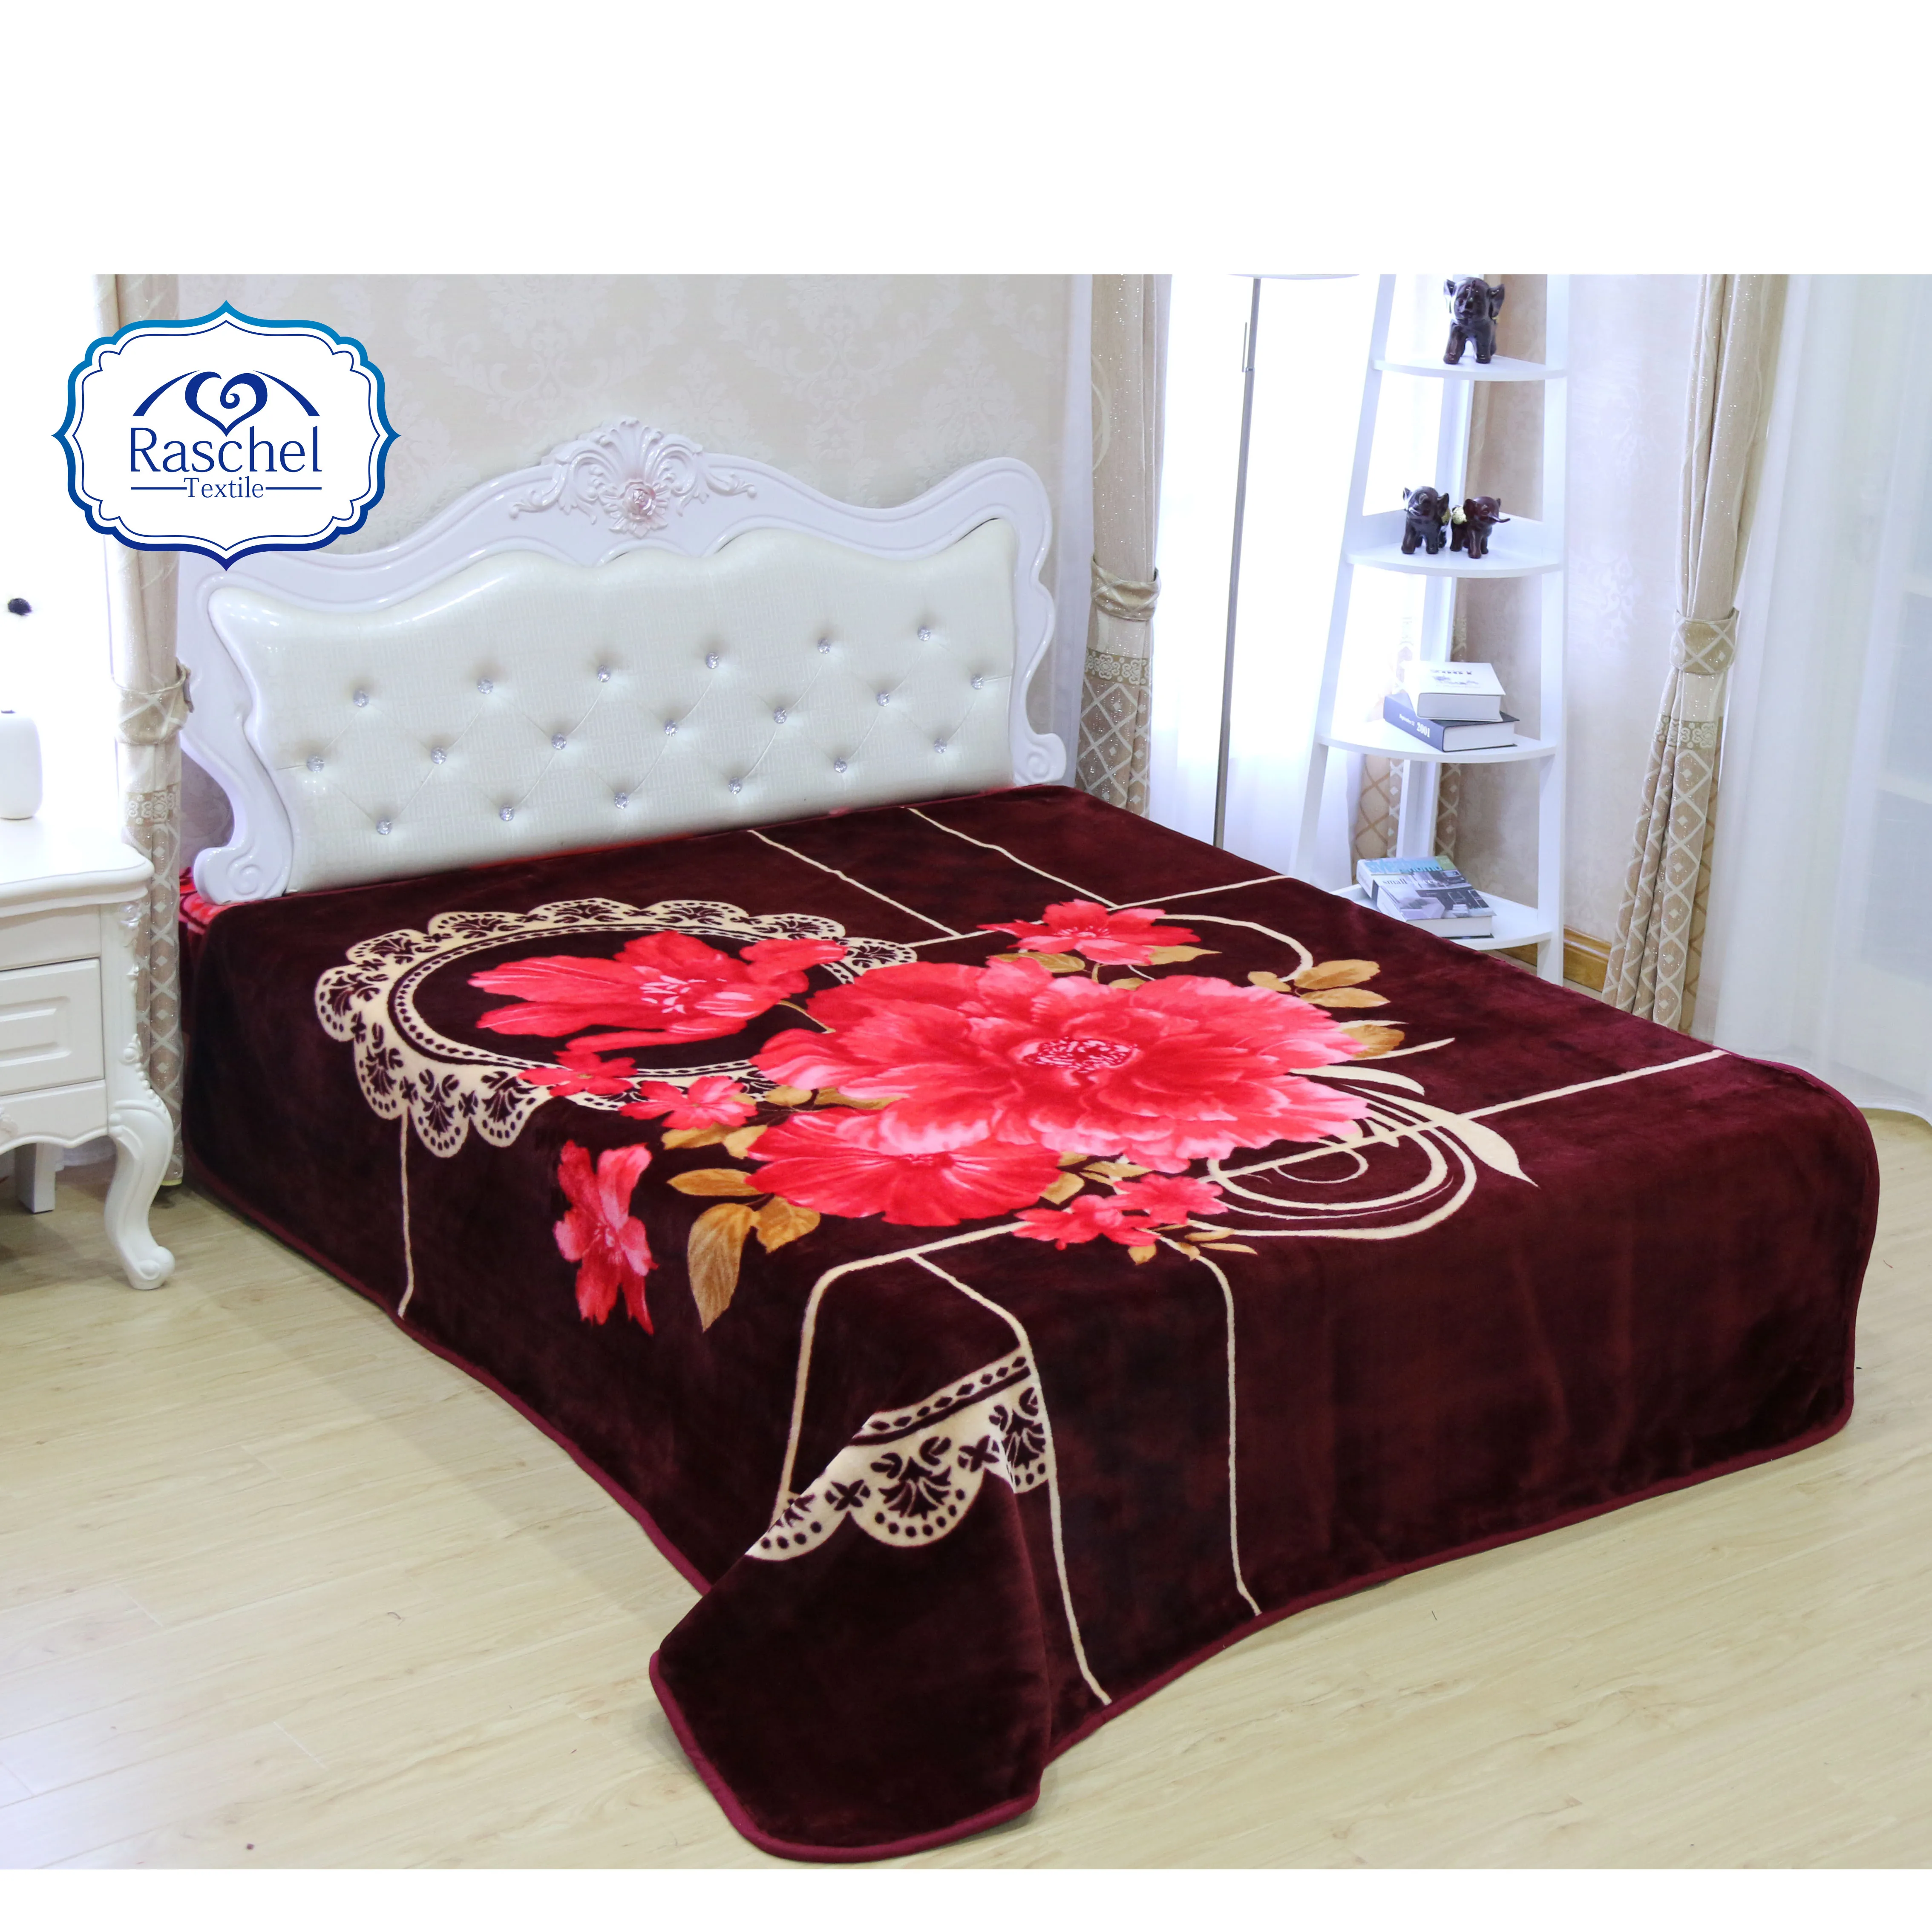 China Wholesale Wuxi Nature Living Cheap 5kg Embossed Double Ply Mink Blanket Buy Mink Blankets In China